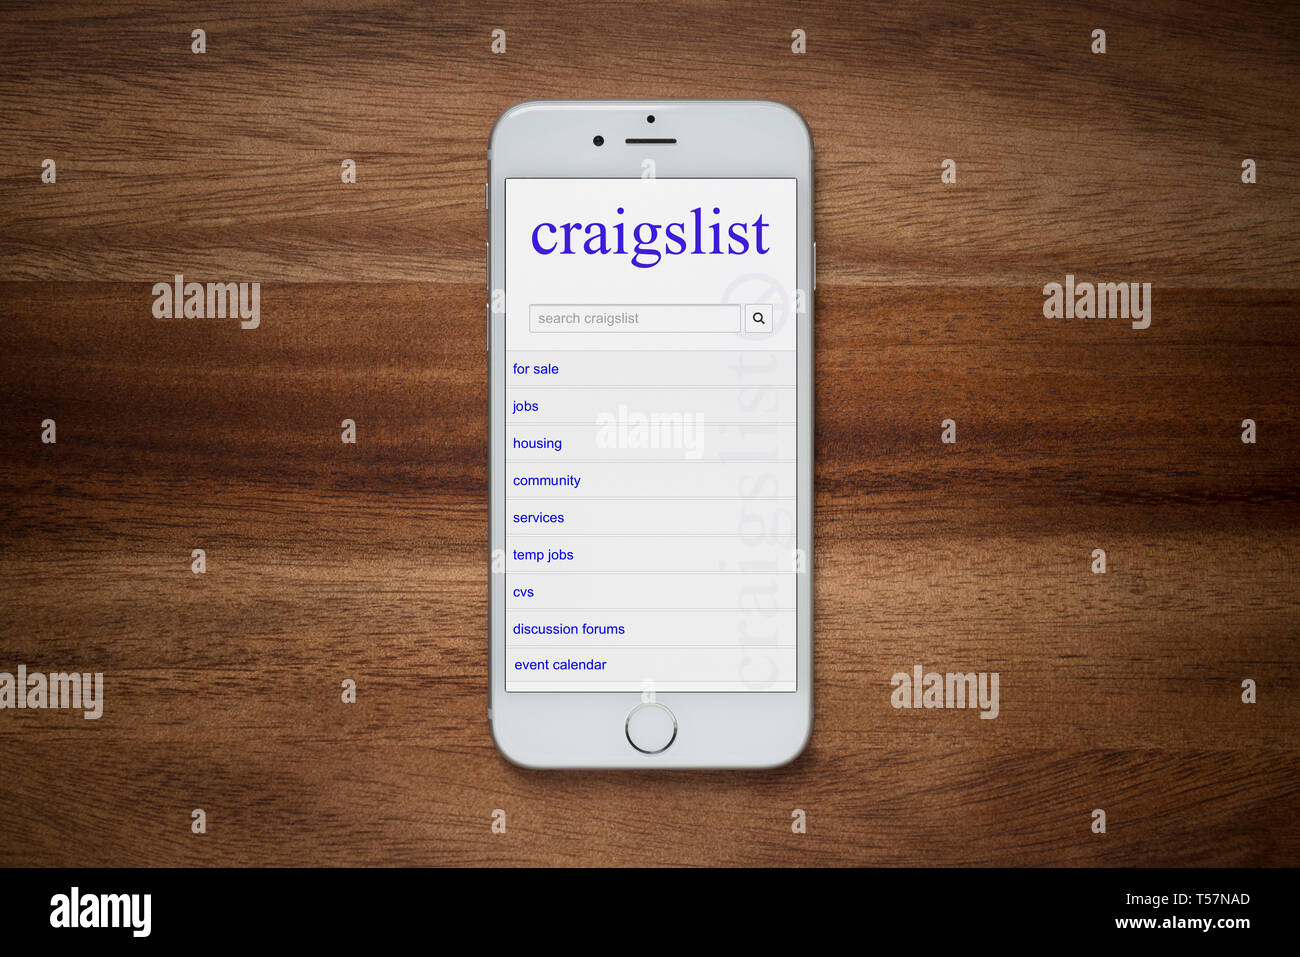 Craigslist app hi-res stock photography and images picture